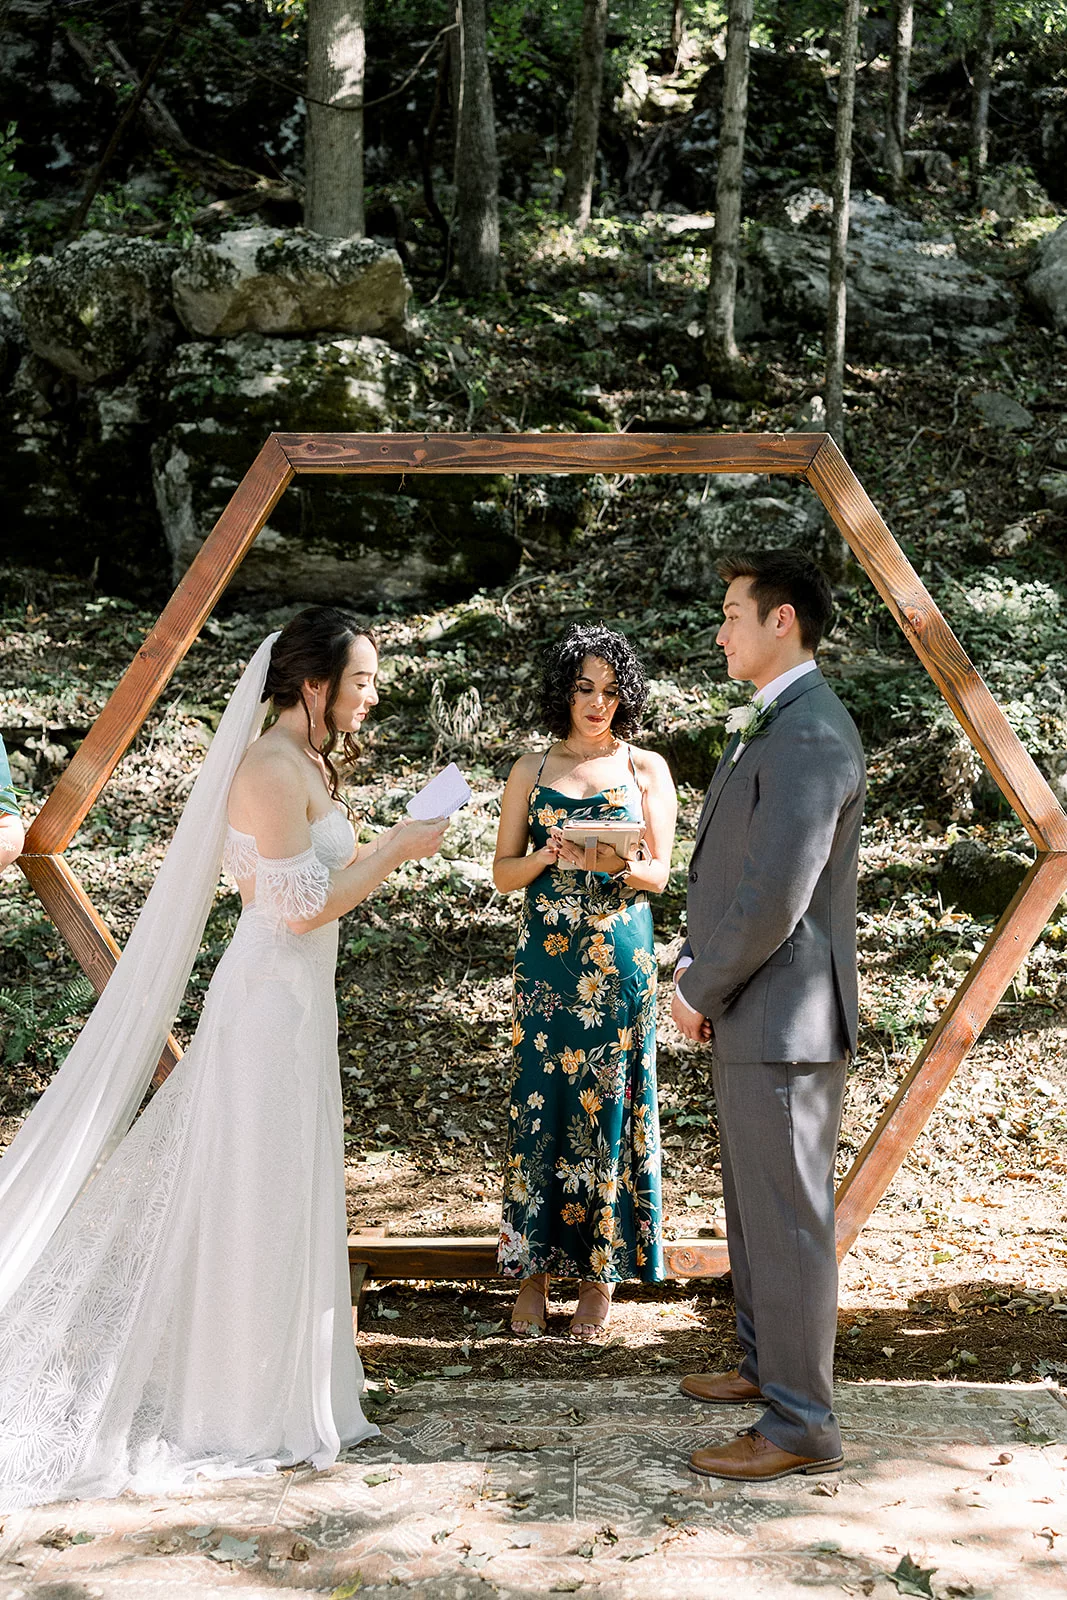 Newlyweds read each other their vows in front of a wooden beam arbor in the forest